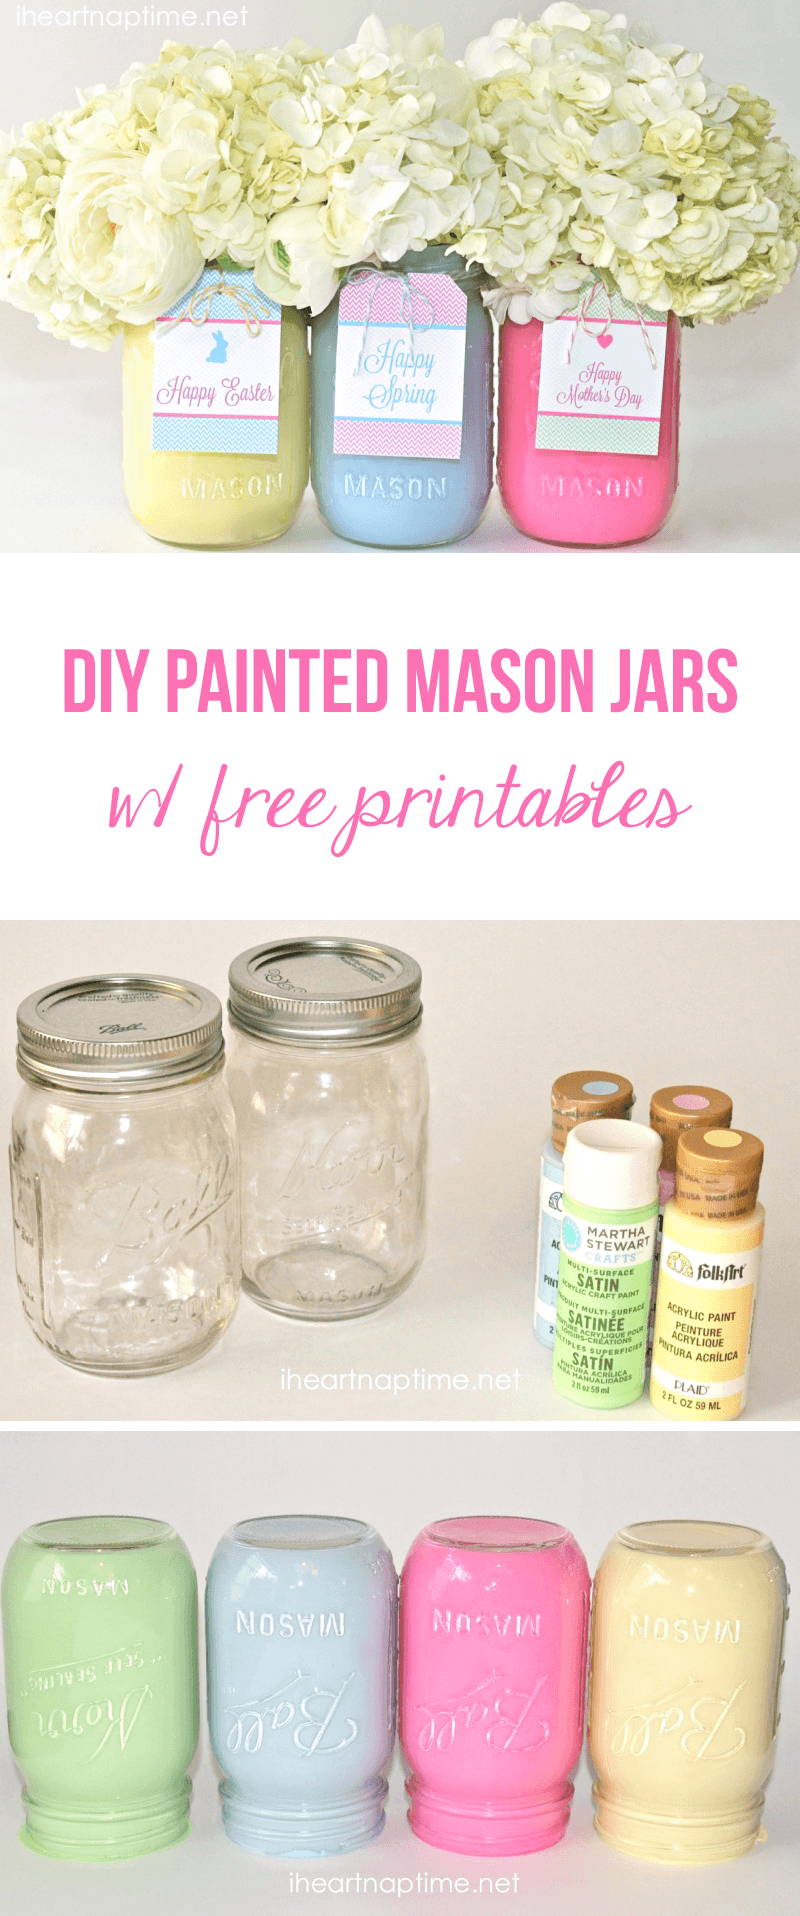  DIY painted mason jars with free tags -these make a cute and inexpensive gift for Easter or Mother's Day!